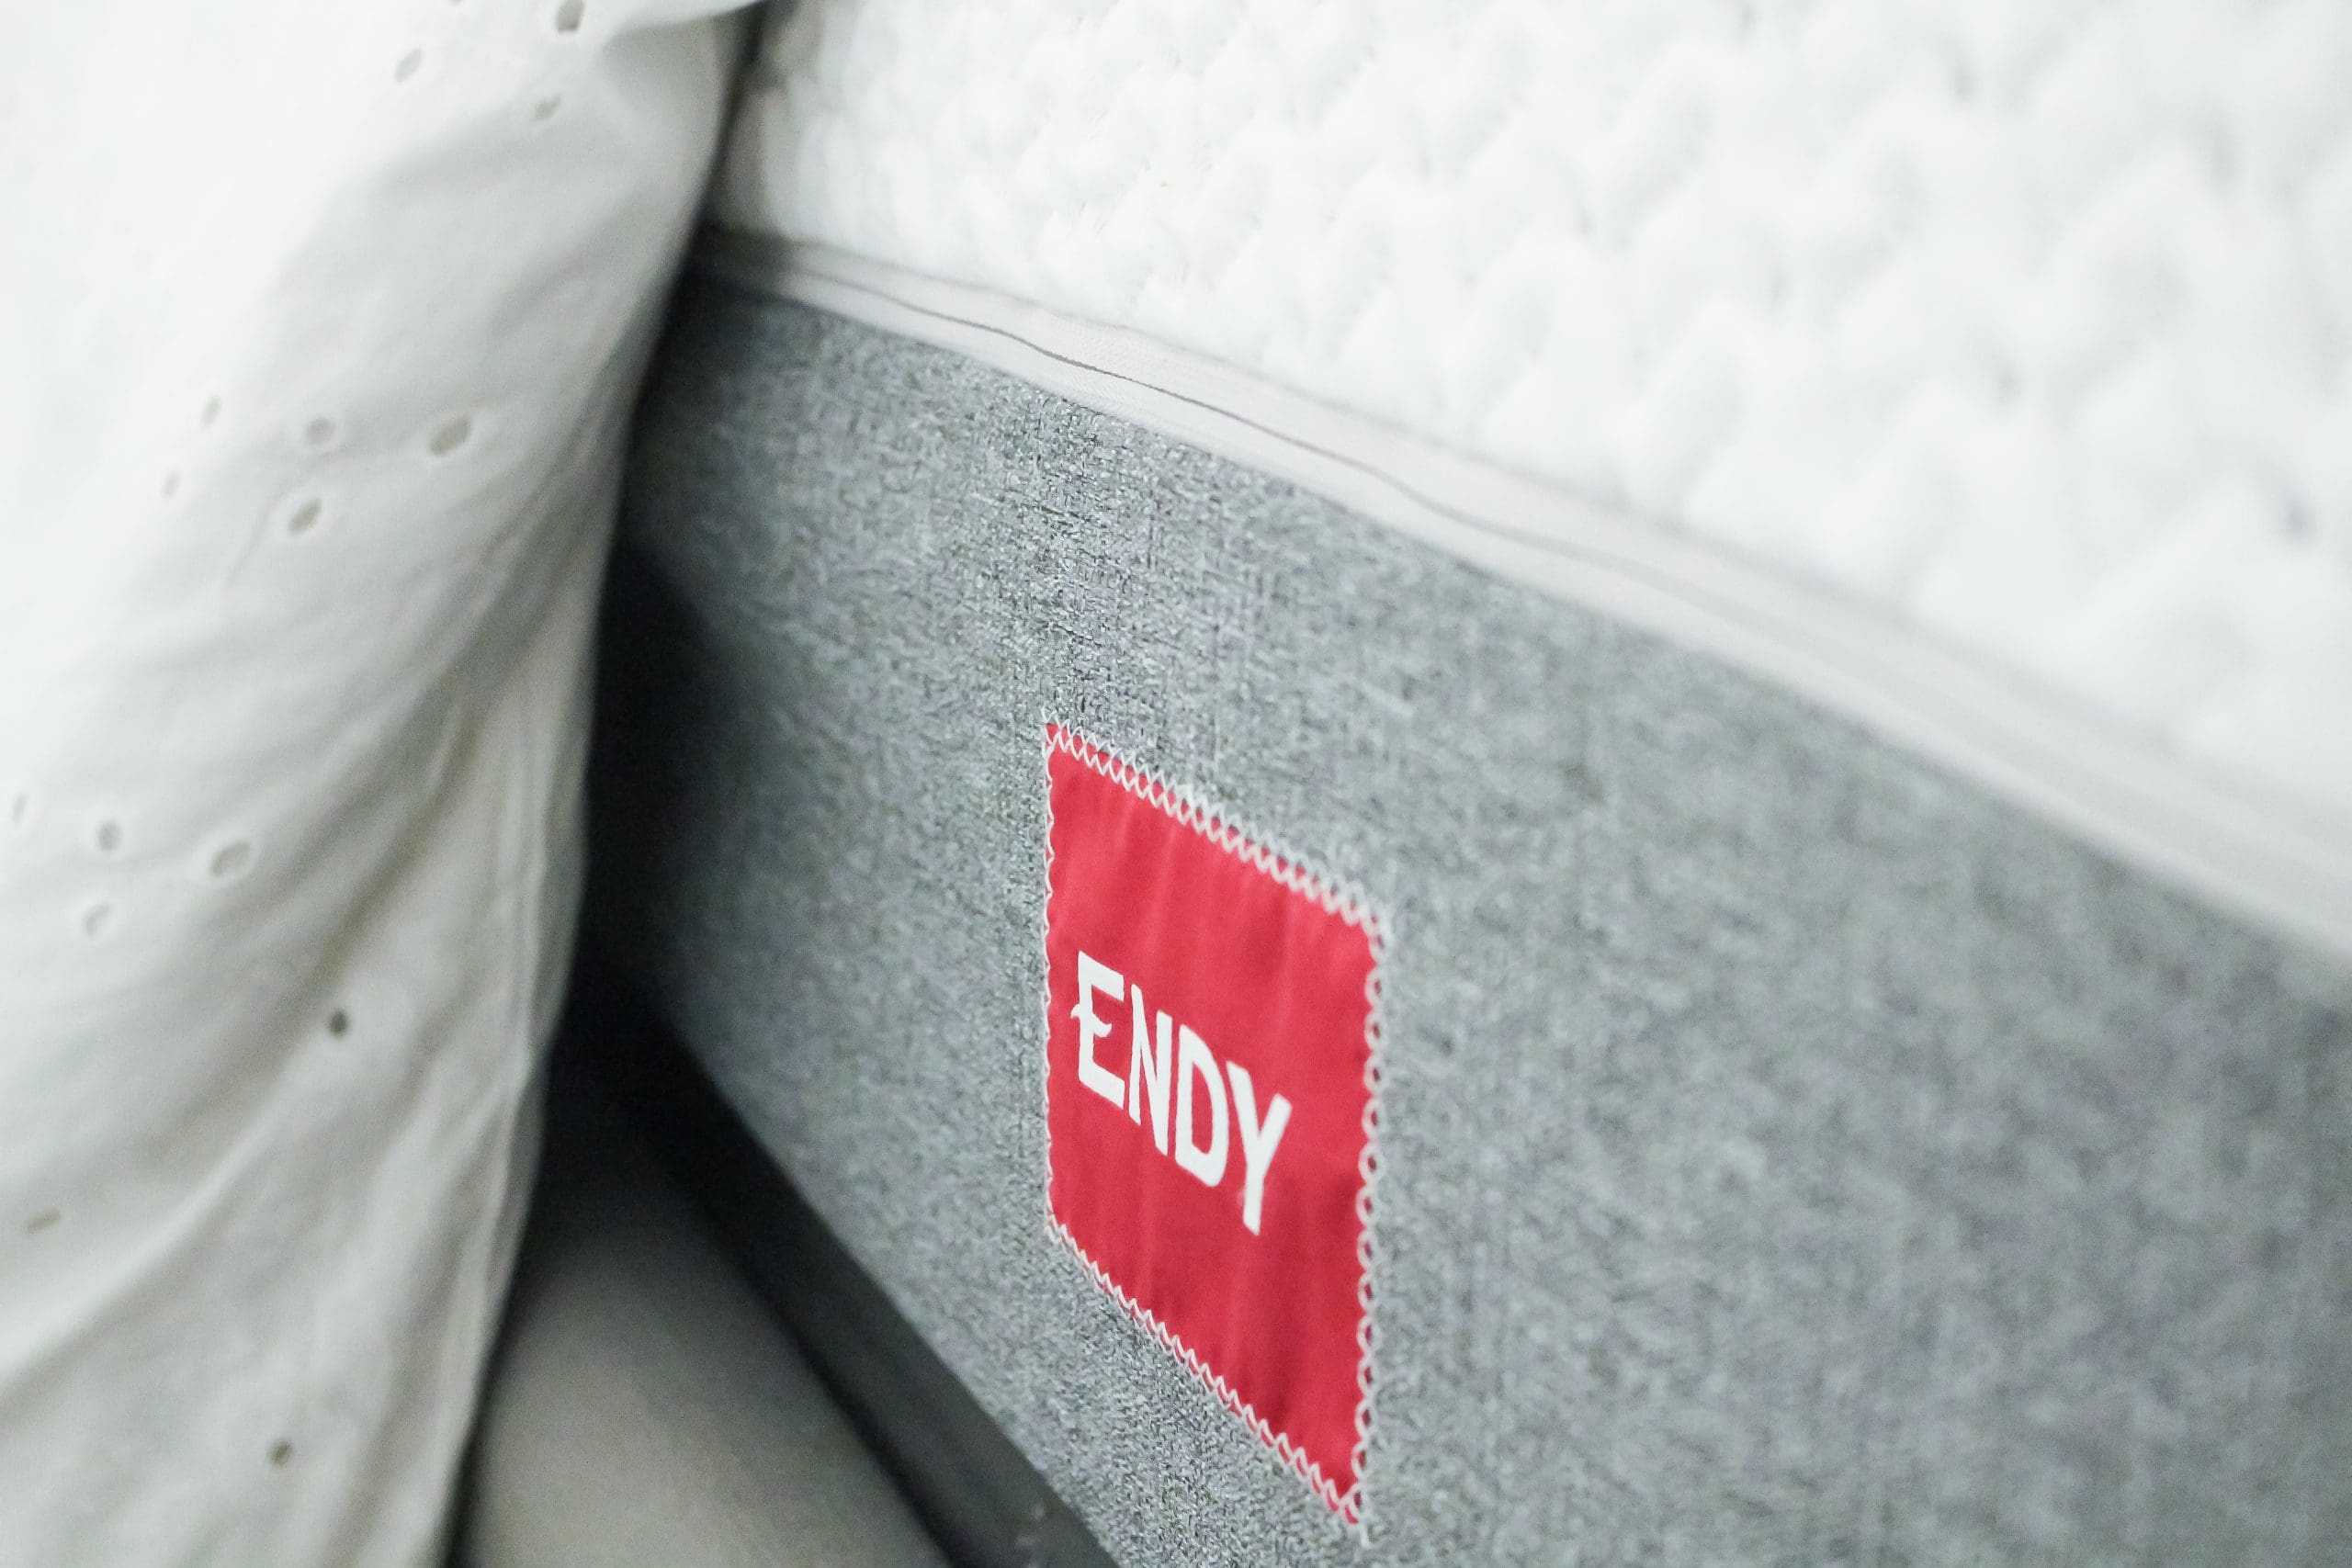 Endy Bed in a box